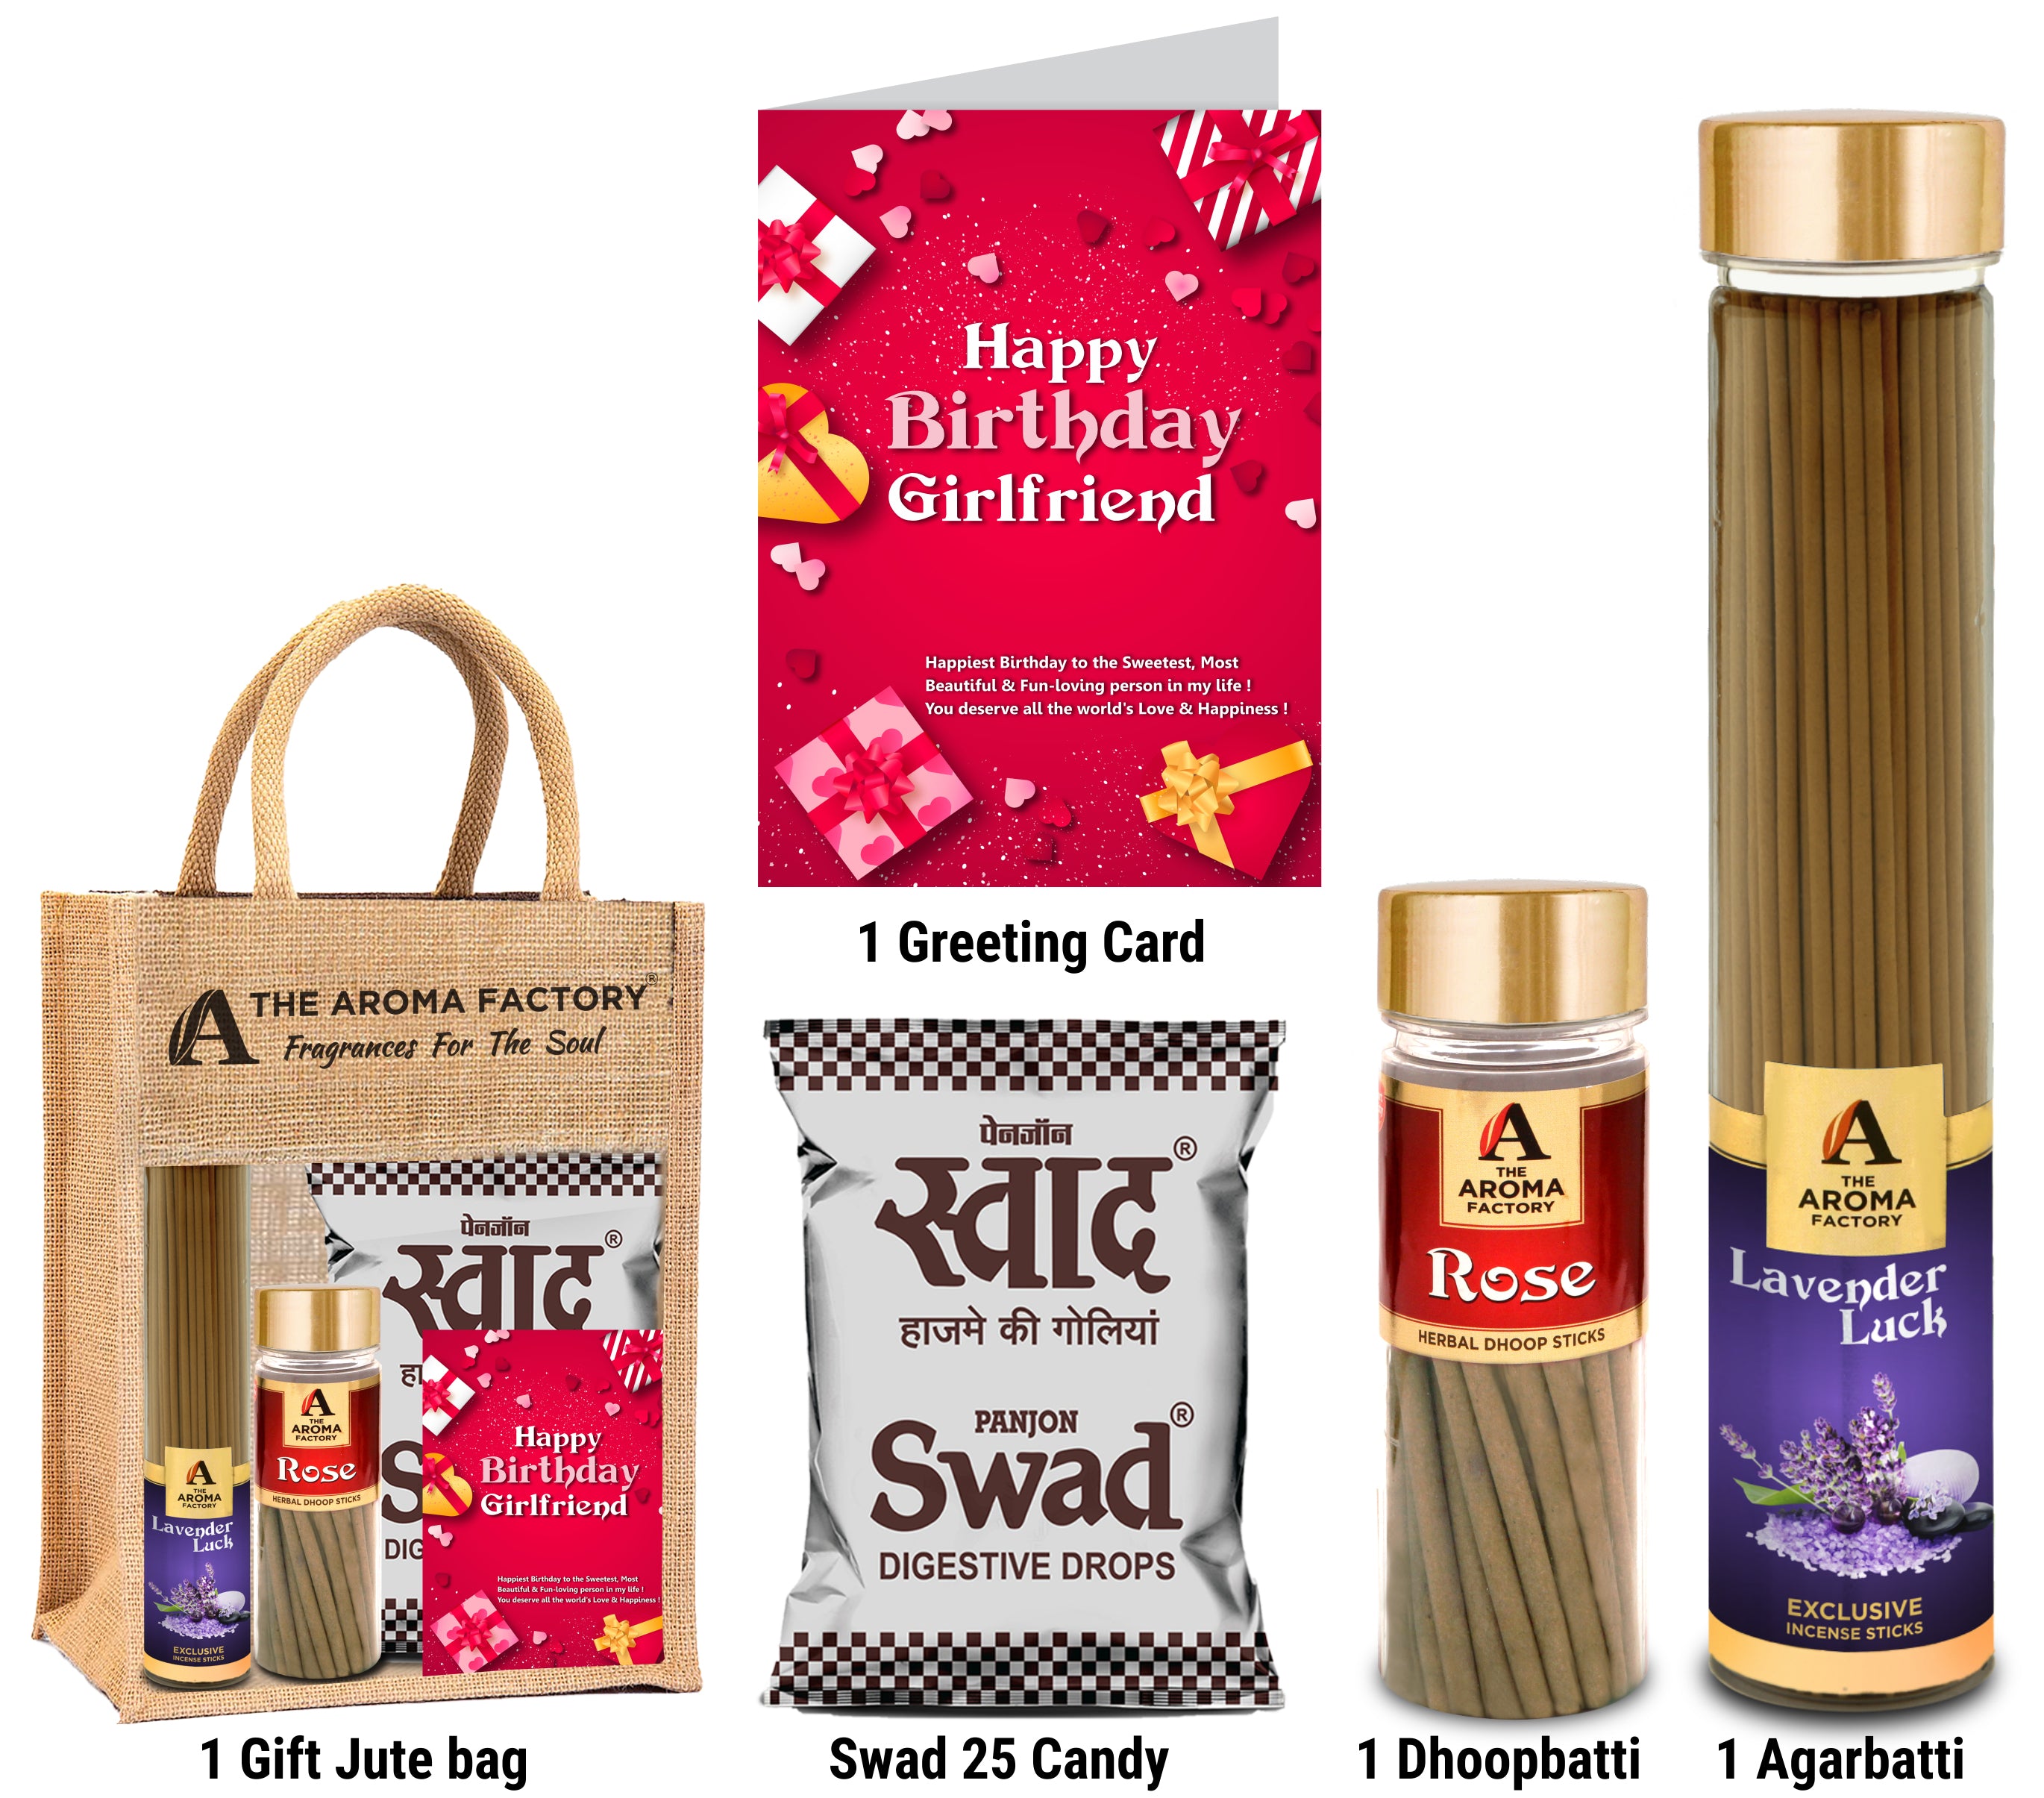 The Aroma Factory Happy Birthday Girl Friend Gift with Card (25 Swad Candy, Lavender Agarbatti Bottle, Rose Dhoopbatti) in Jute Bag